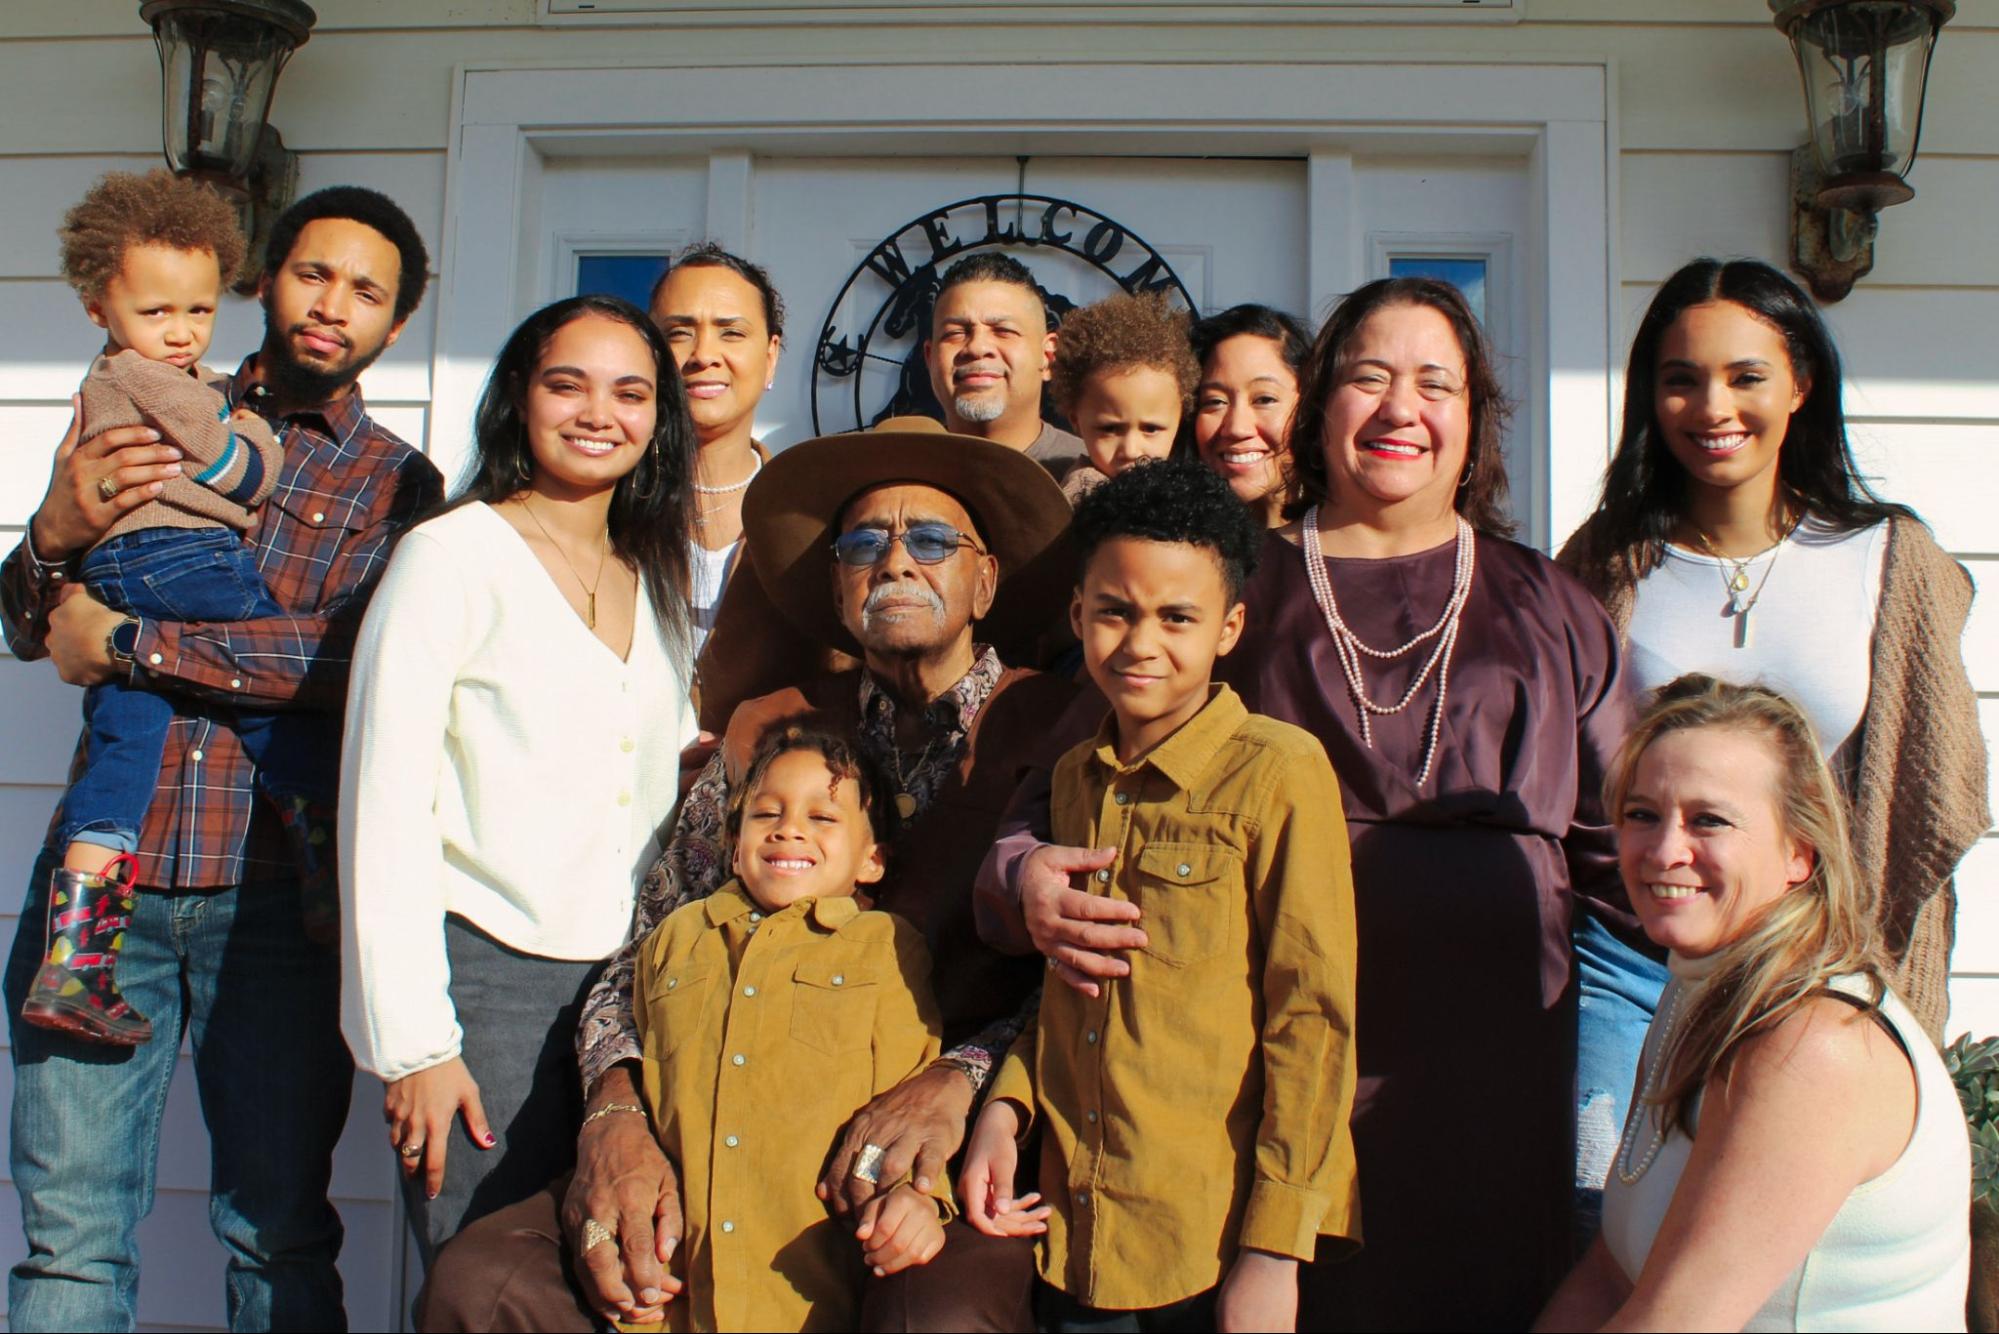 A multigenerational Latinx family is taking a photo together.